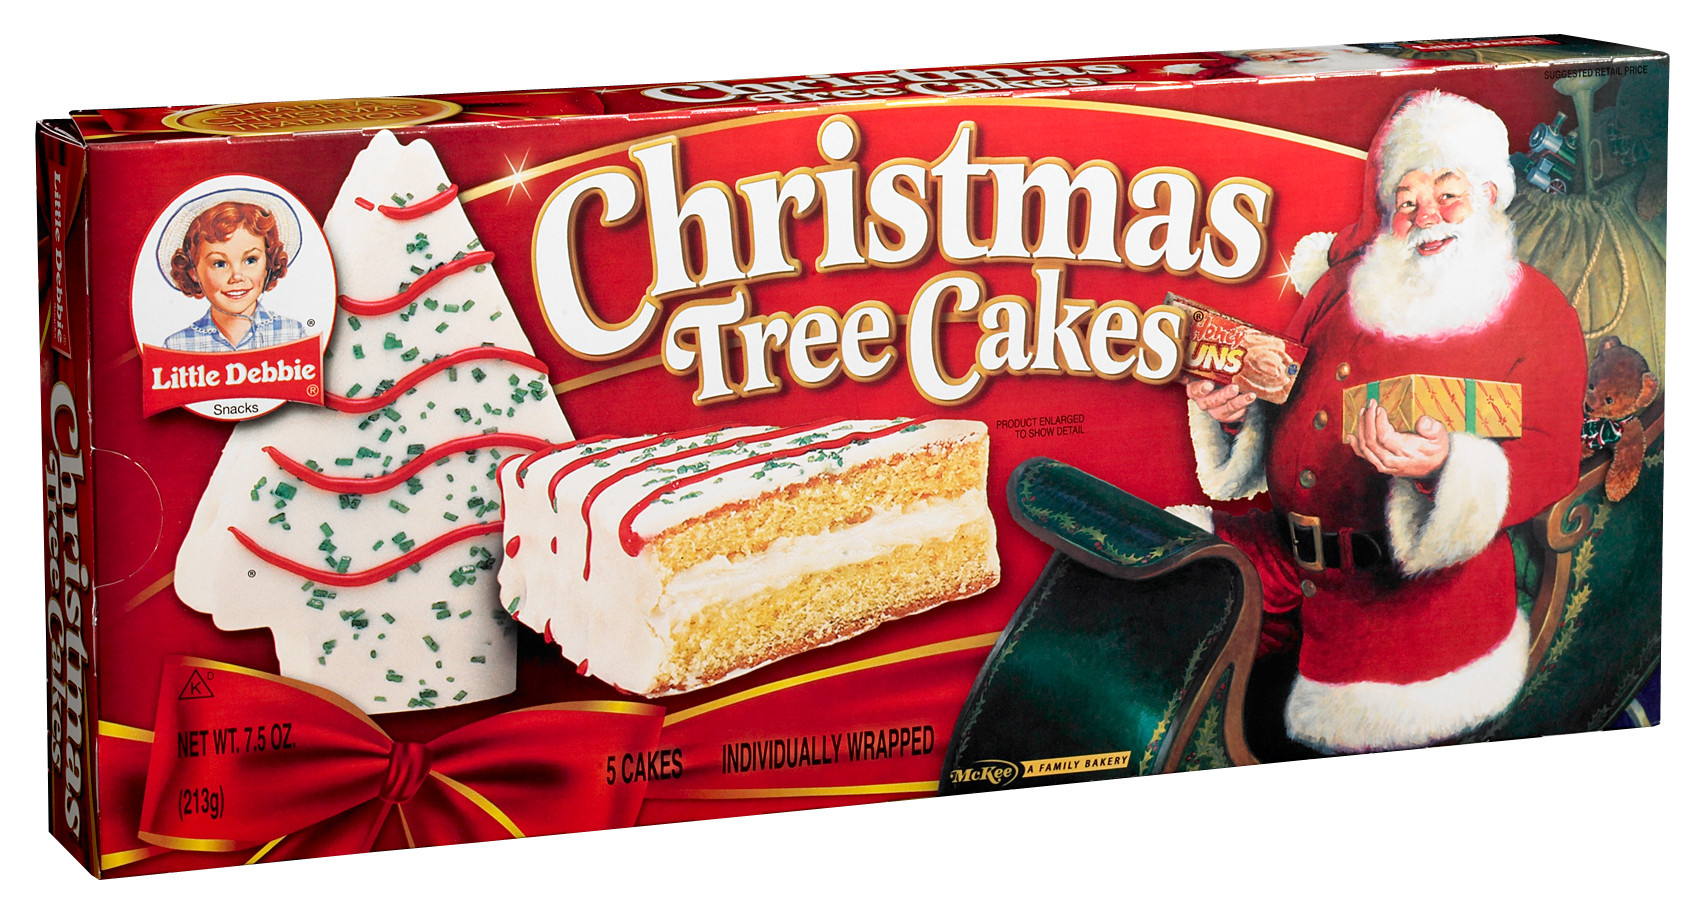 Little Debbies Christmas Tree Cakes
 Little Debbie Copycat Recipes To Make At Home